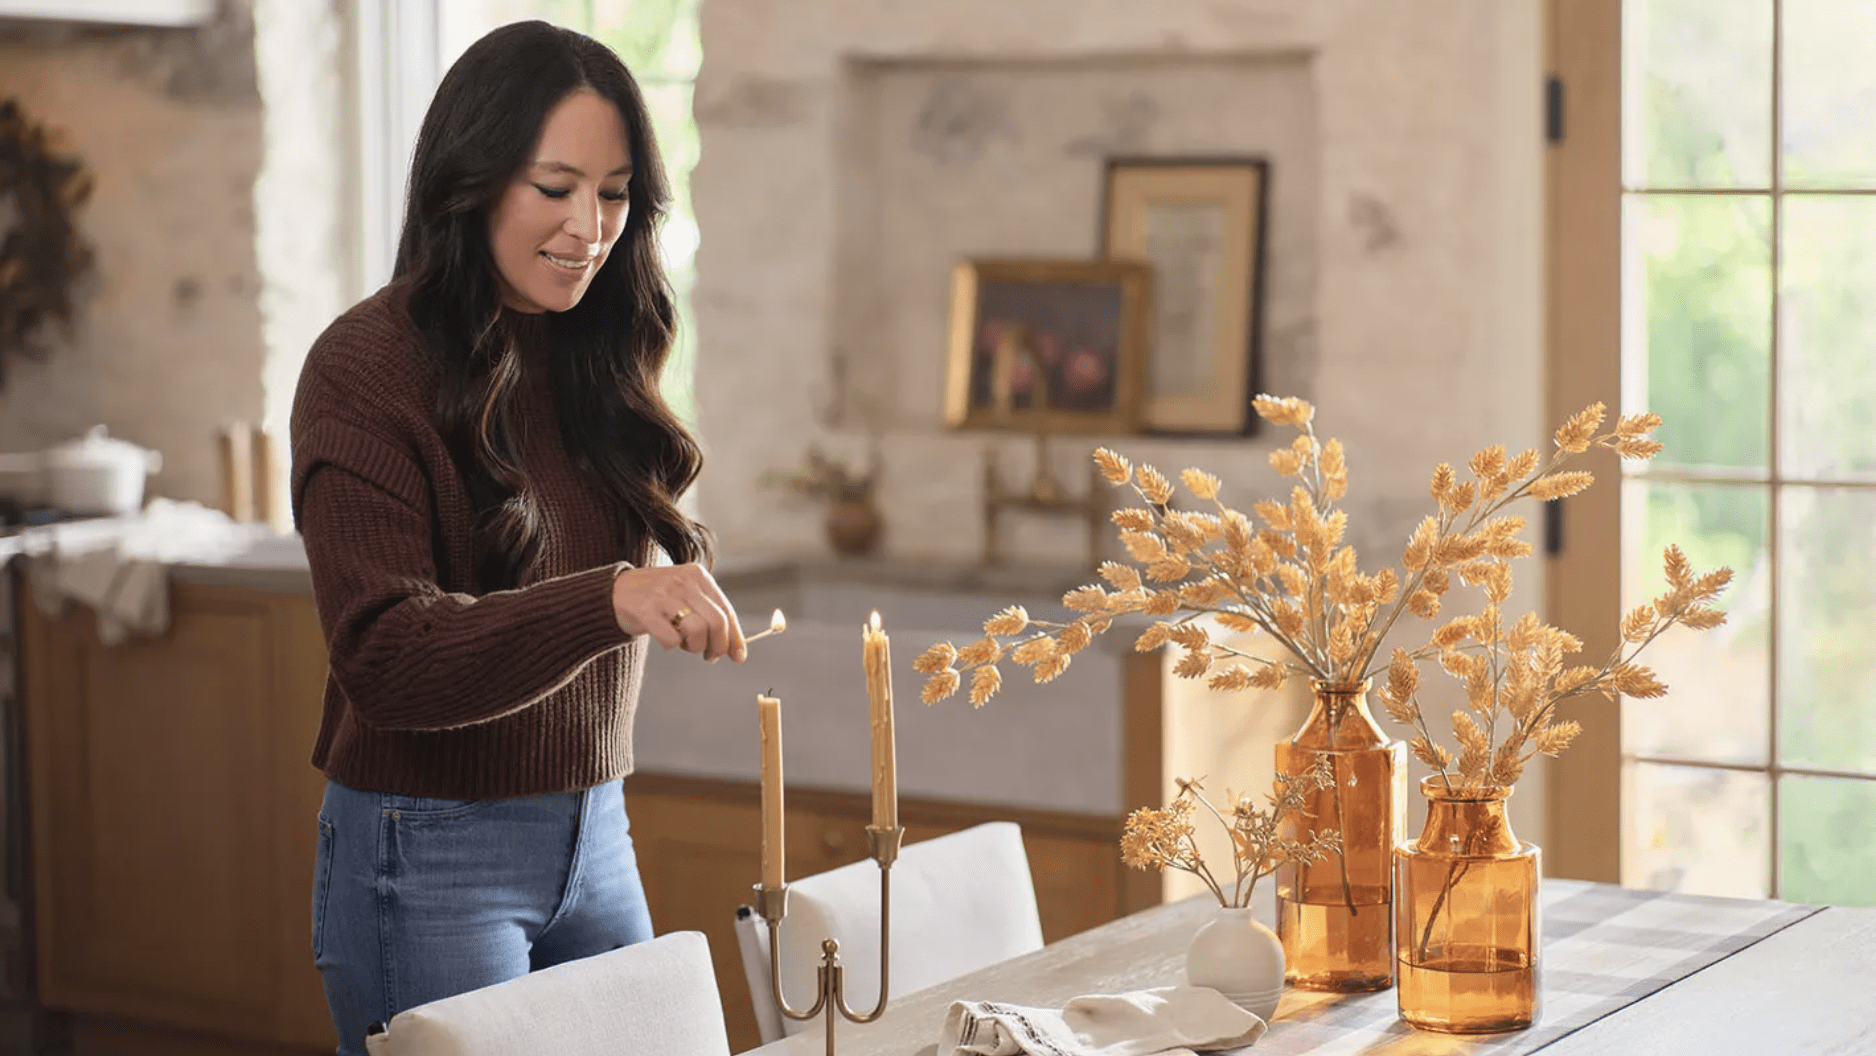 Joanna Gaines' Target Home Collection Is 40% Off for 2 More Days